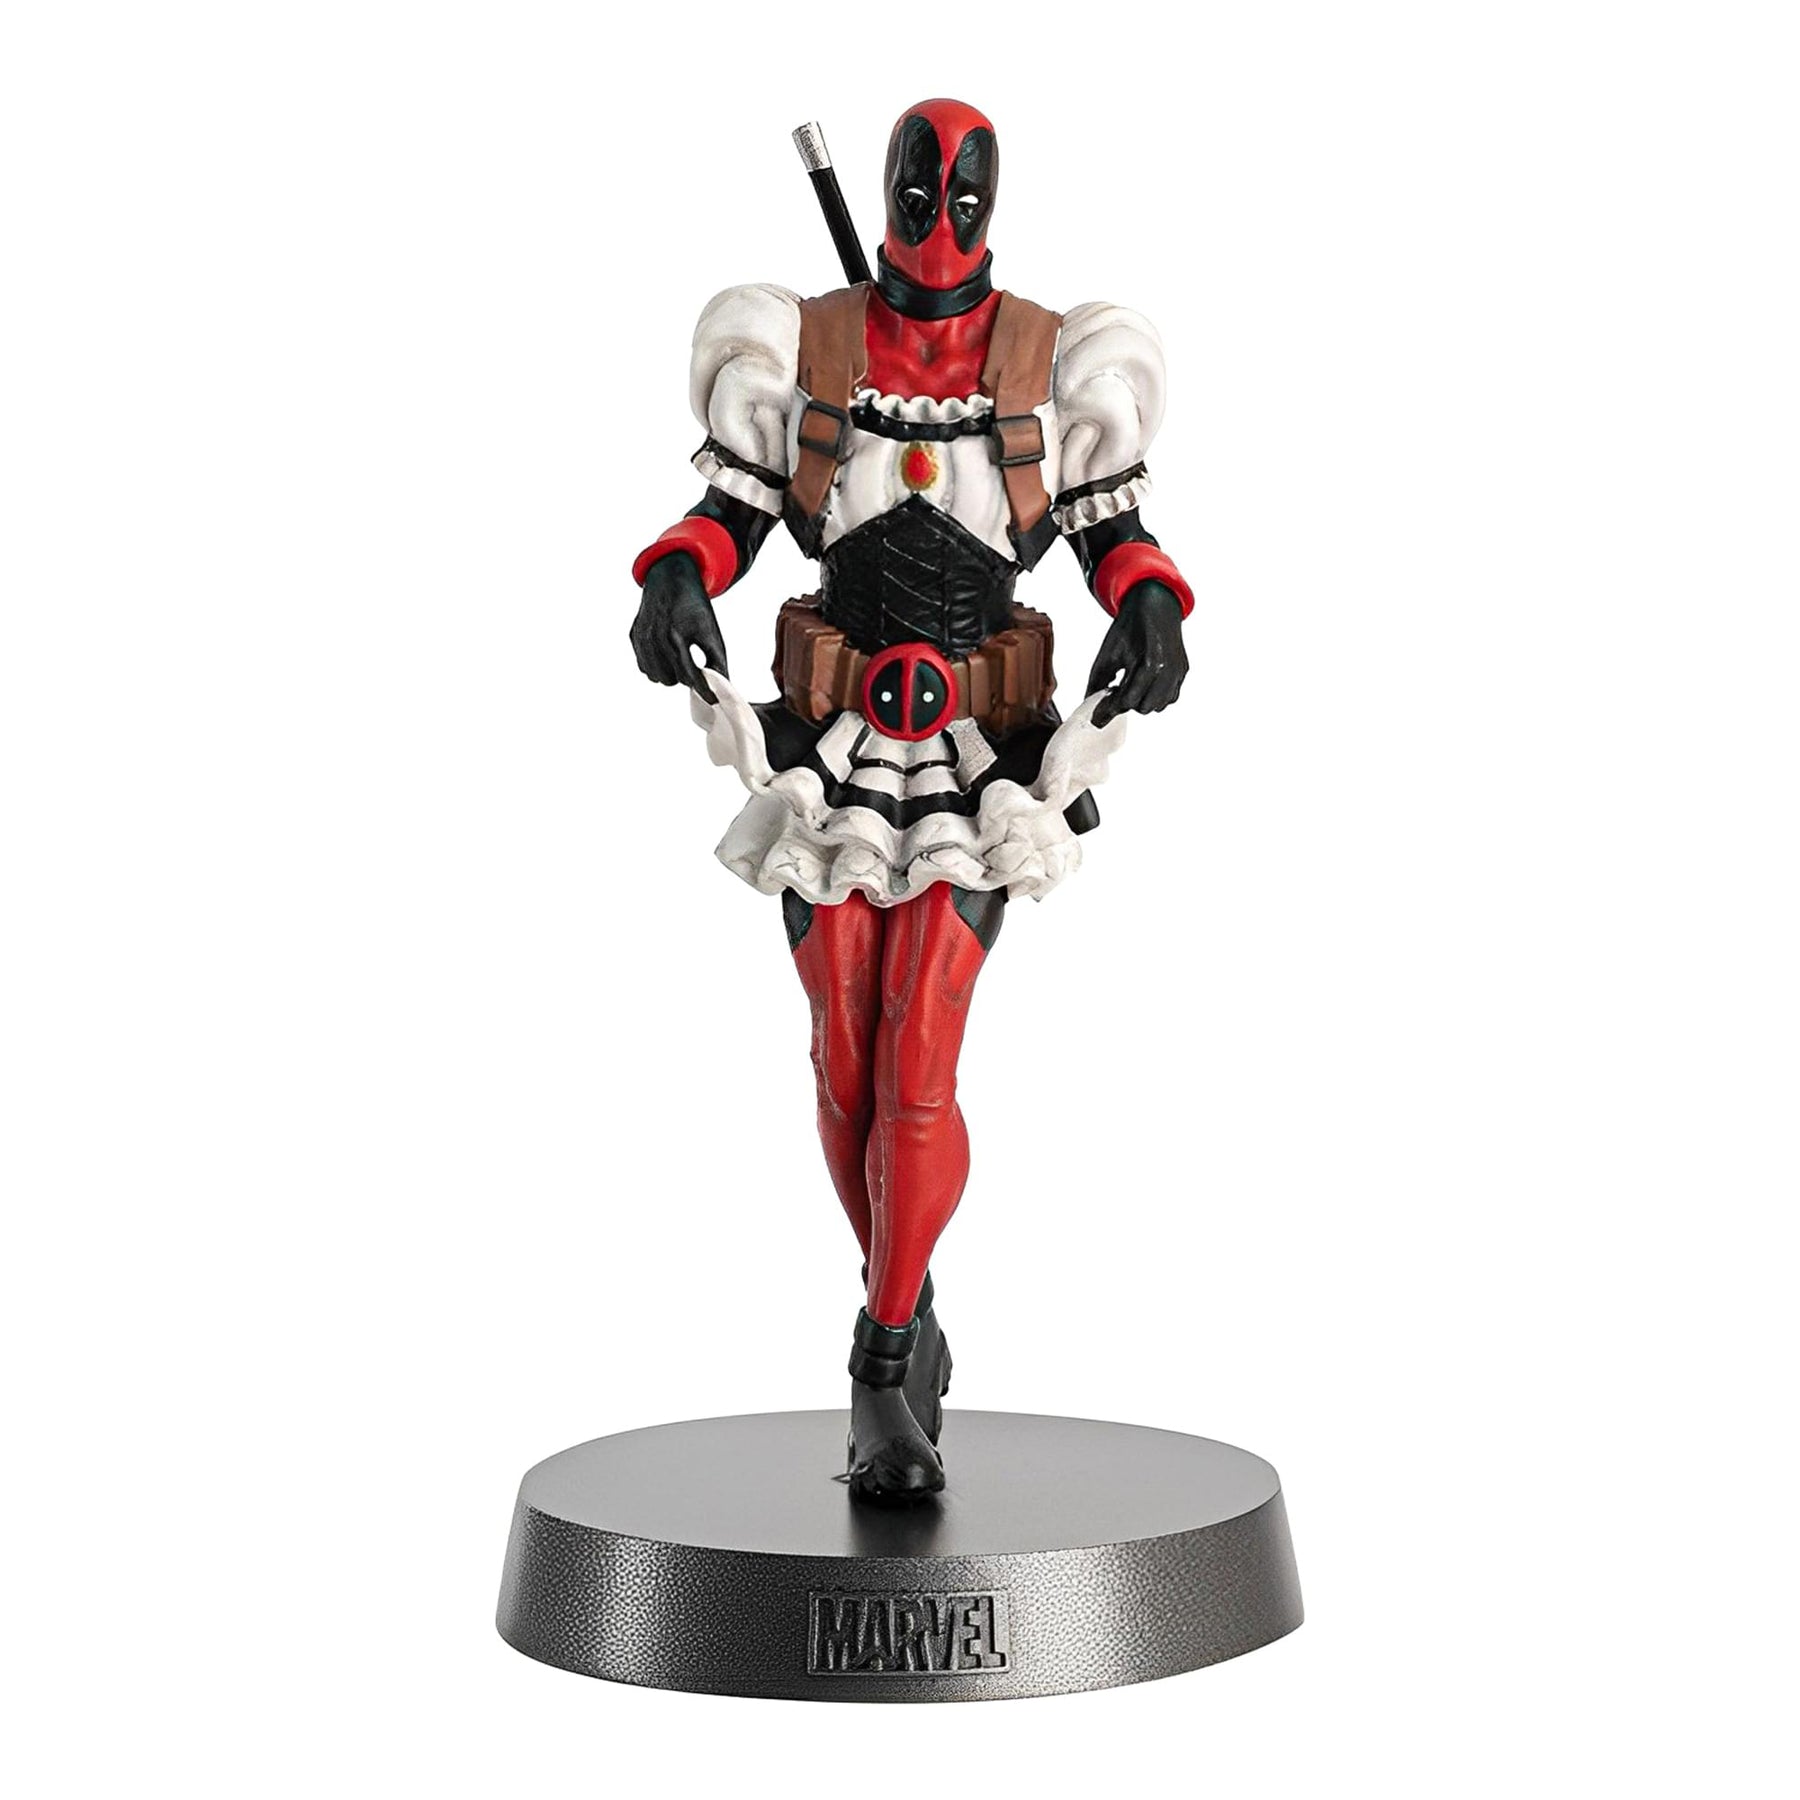 Marvel Heavyweights 1:18 Scale Metal Statue | French Maid Deadpool